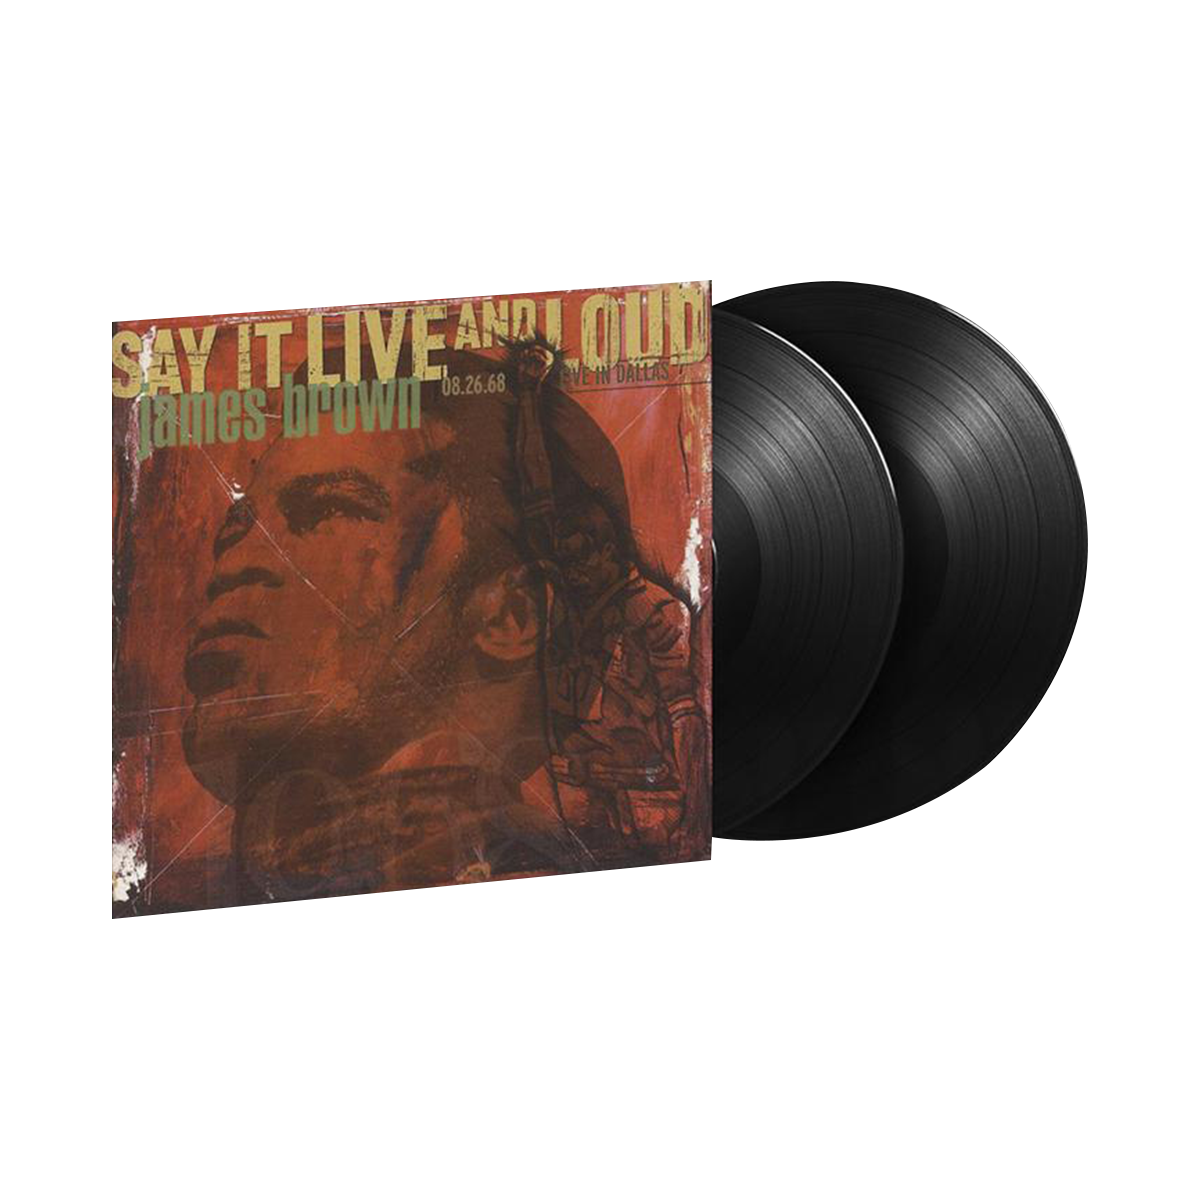 James Brown, Say It Live And Loud: Live In Dallas 08.26.68 (LP 